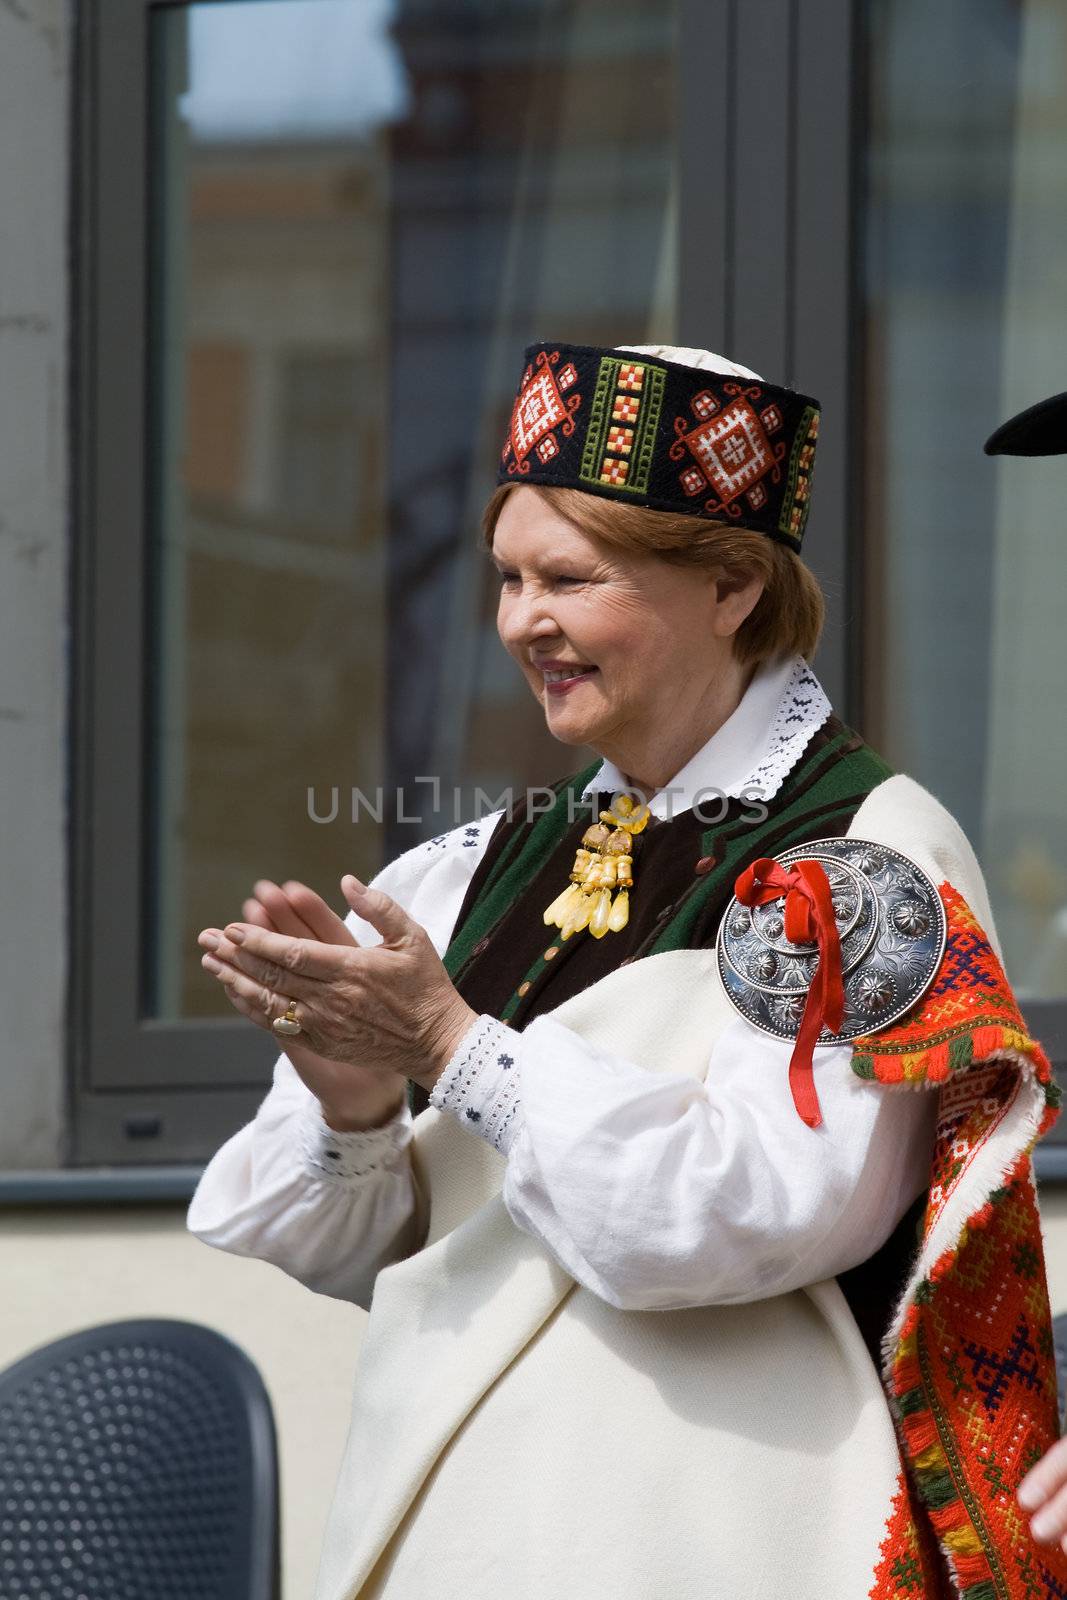 Ex-President of the Republic of Latvia Vaira Vike-Freiberga wearing traditional costume greets the participants of the procession of the Song and Dance Celebration festival in Riga, Latvia, July 6, 2008